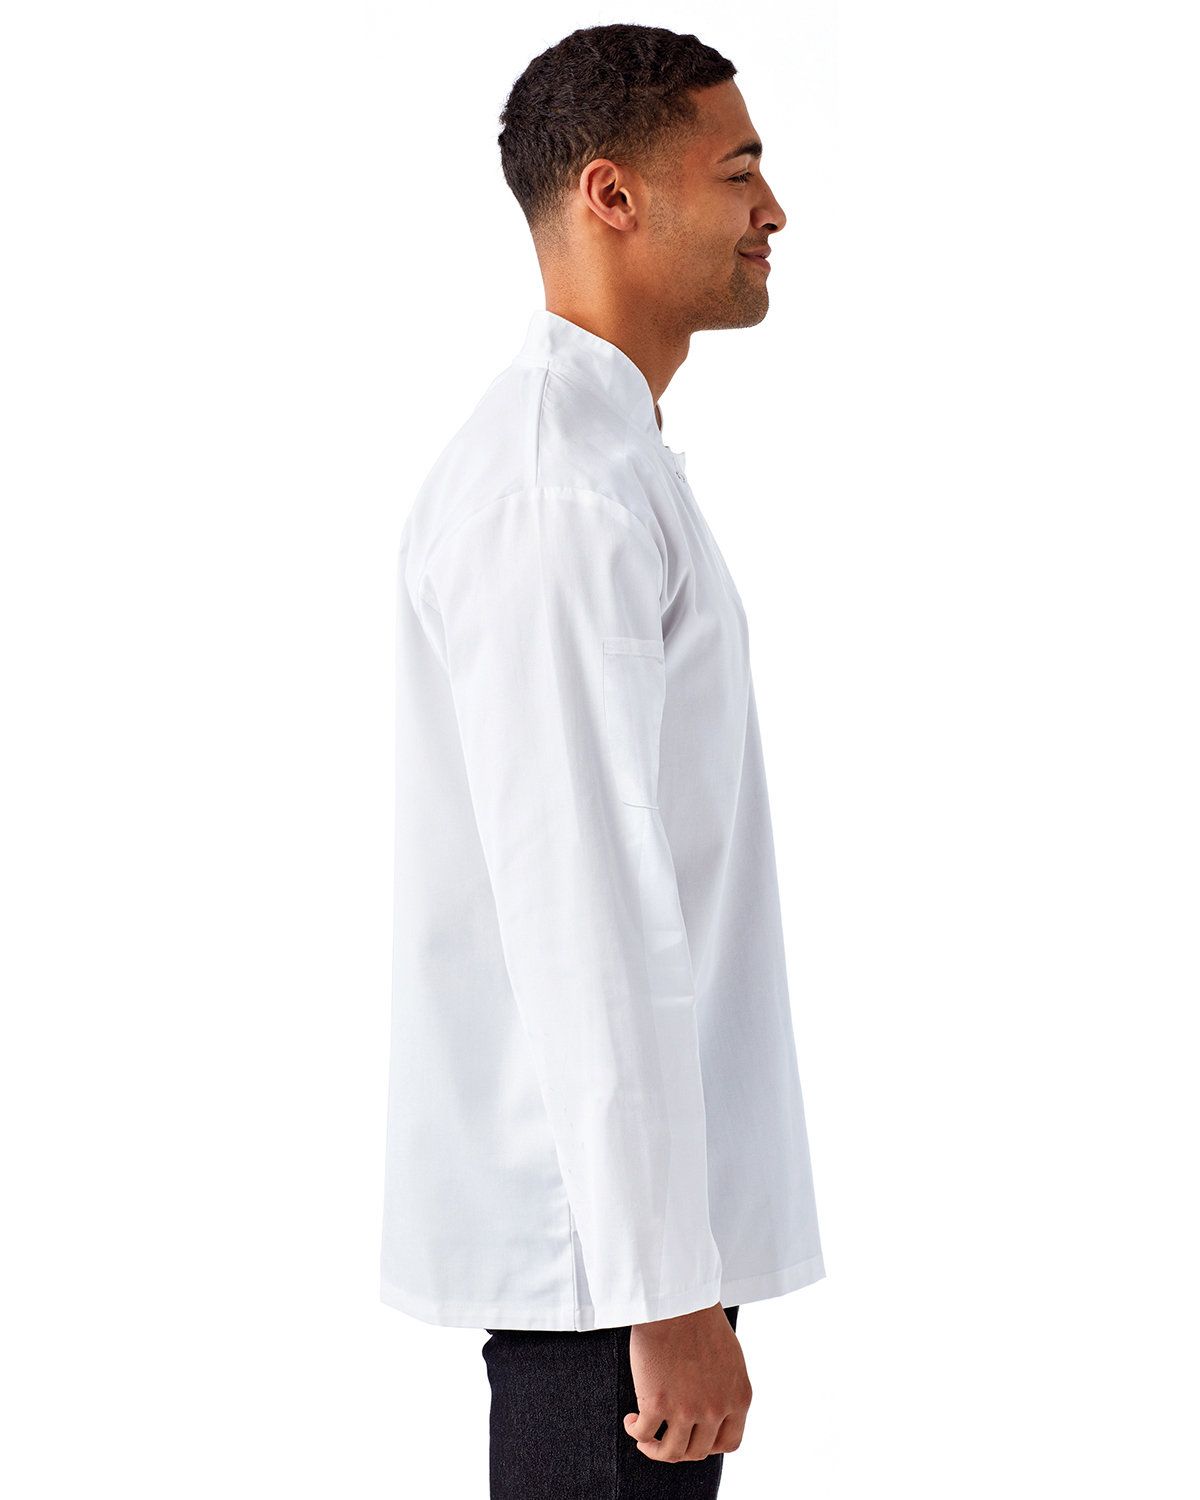 'Artisan Collection by Reprime RP665 Unisex Studded Front Long-Sleeve Chef's Coat'